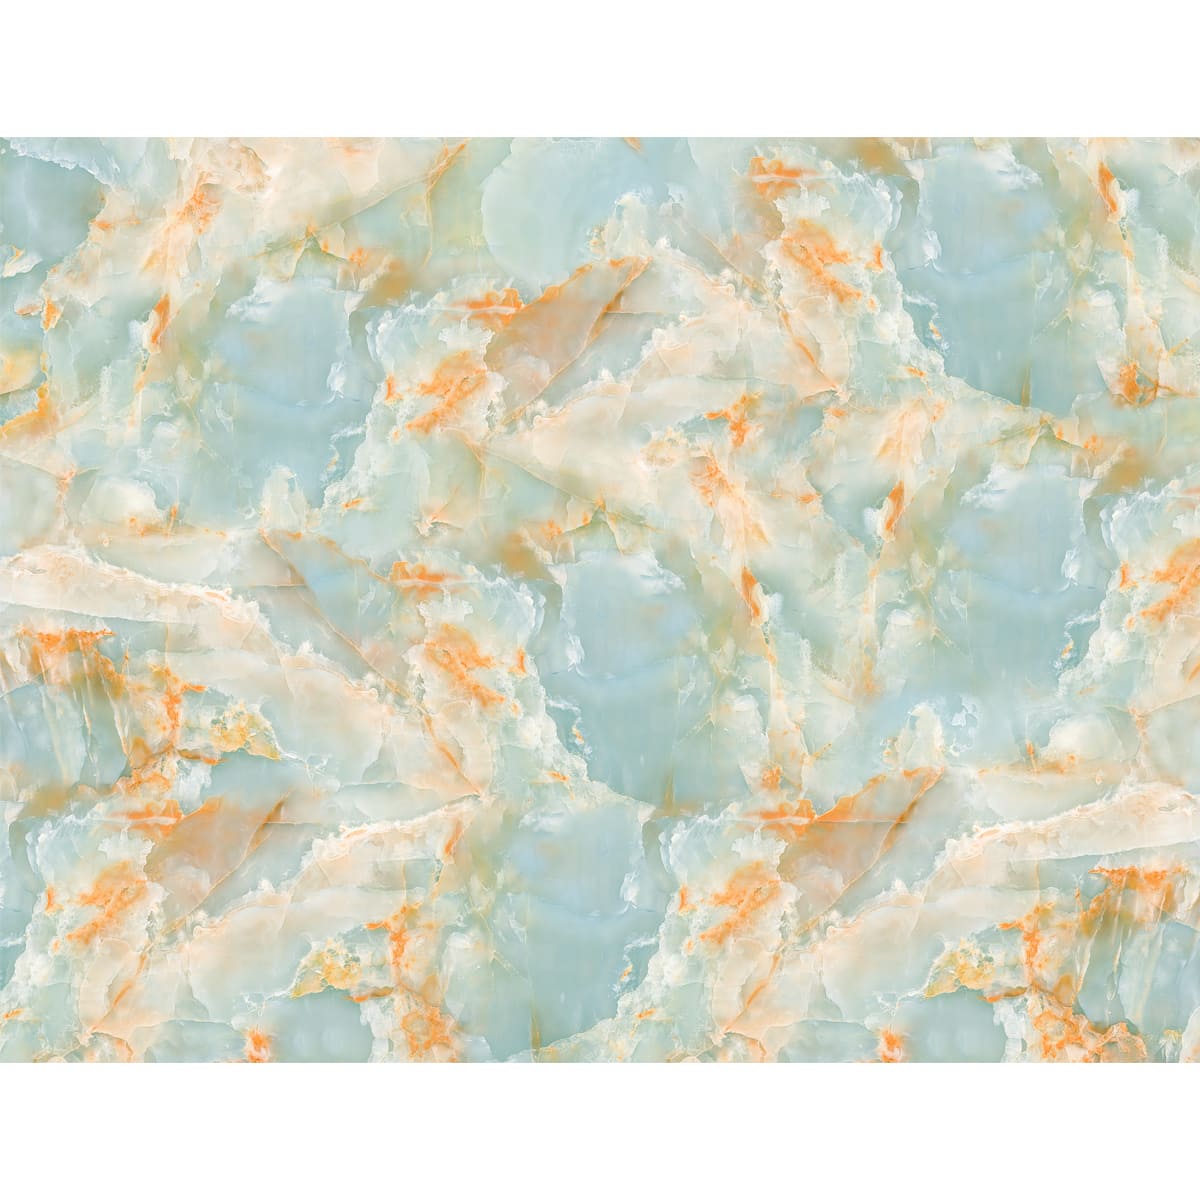 Marble Design Wallpaper for Rooms, Green and Orange